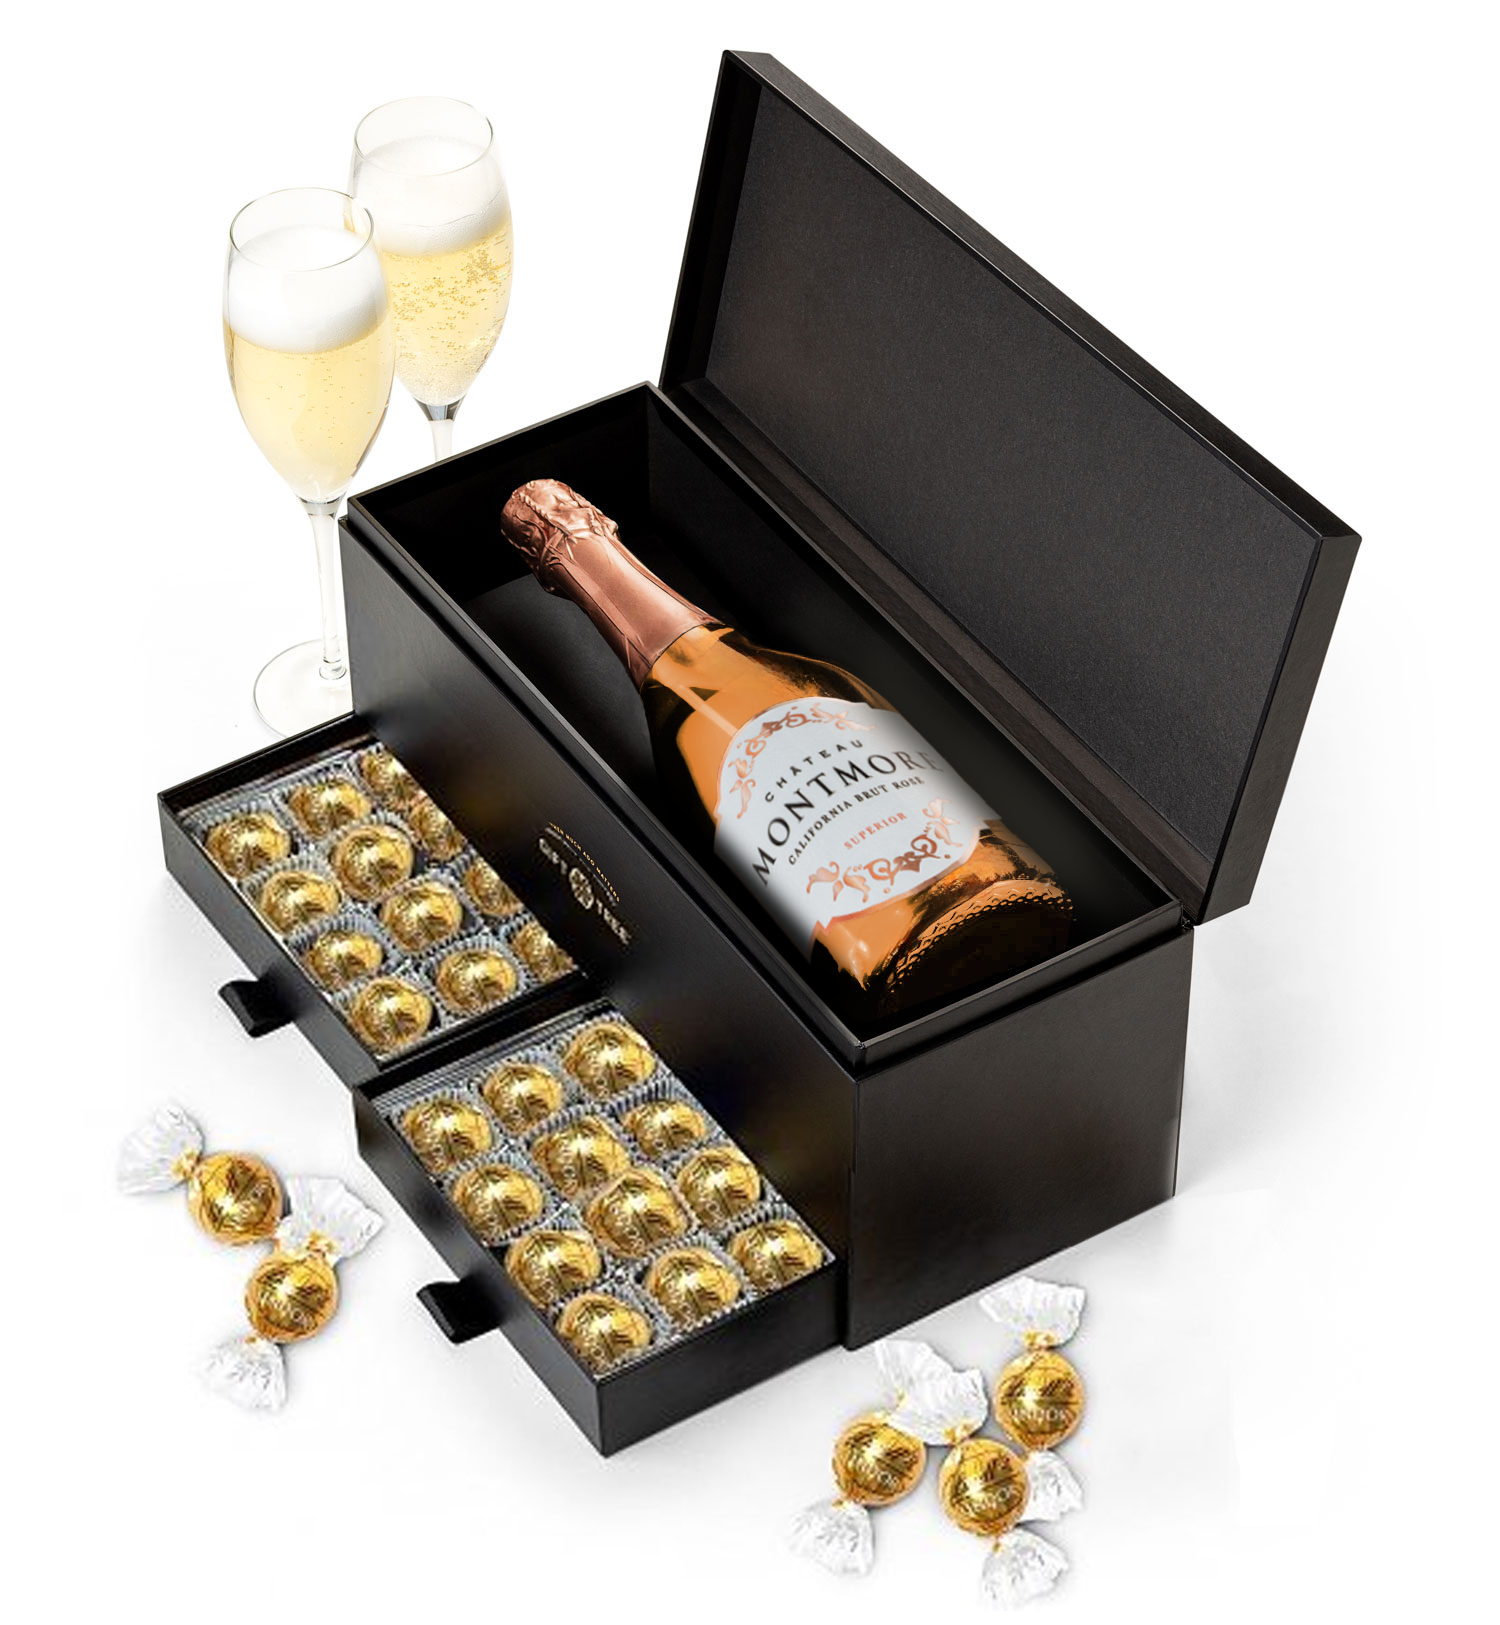 Chateau Montmore Sparkling Rosé and Chocolate Pairing